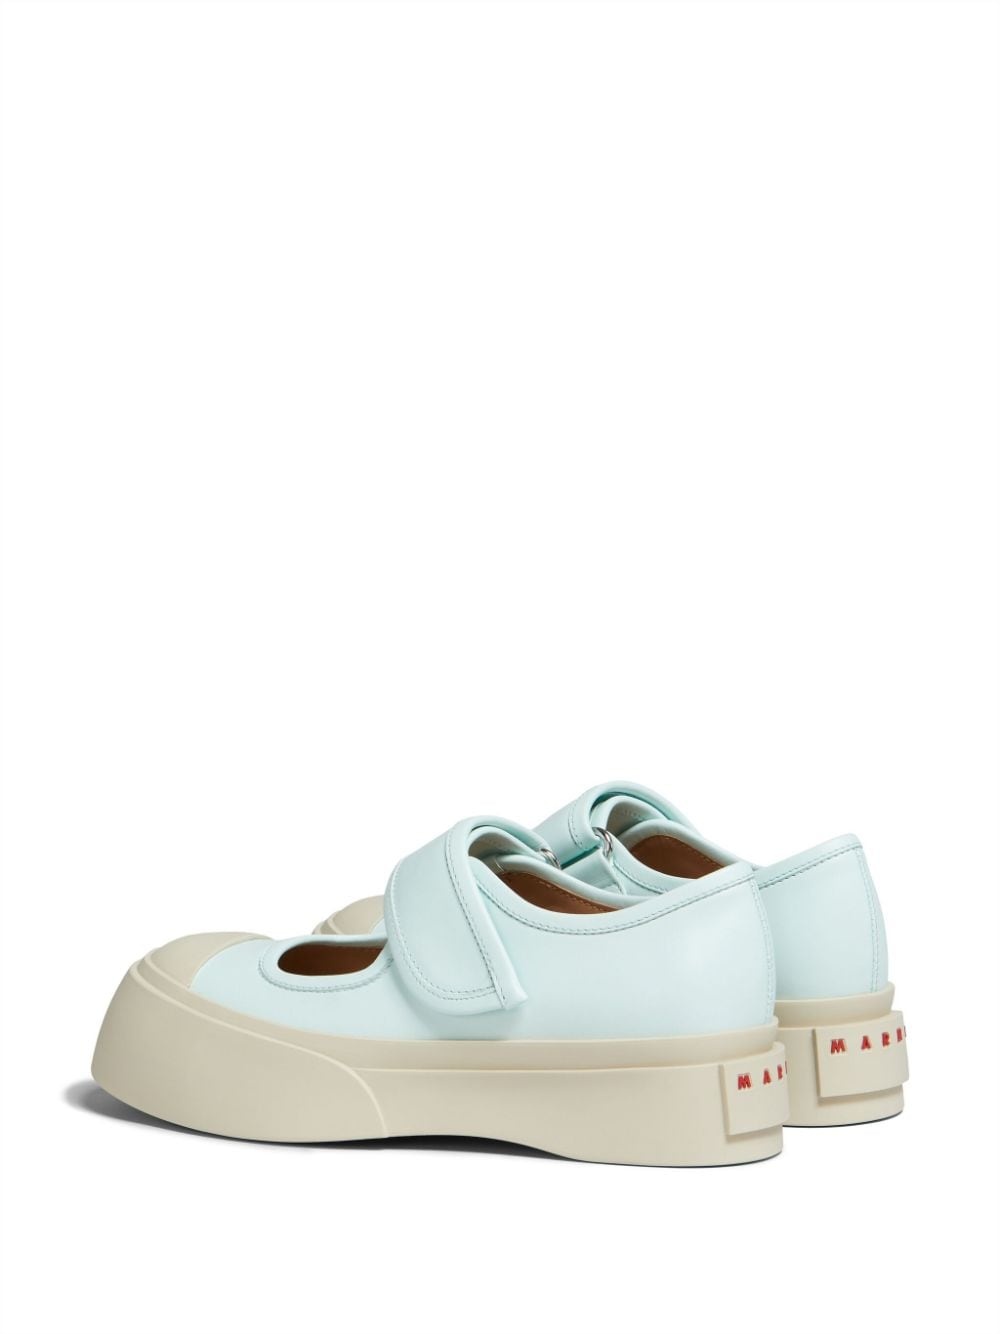 Pablo Mary Jane leather sneakers - 3